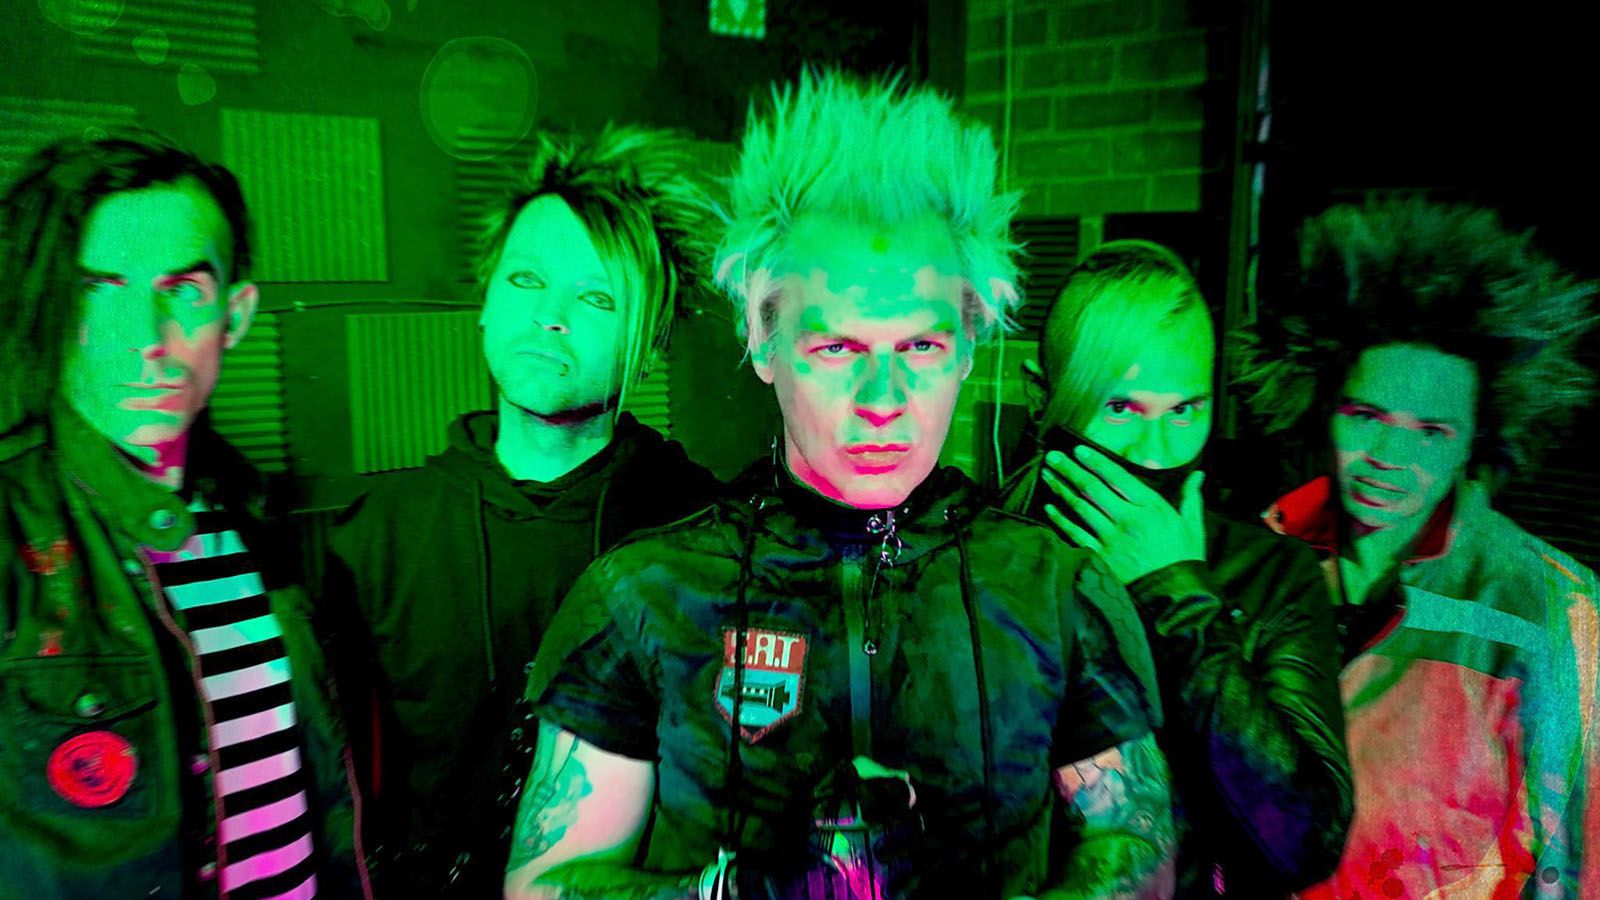 Powerman 5000 will be at Piere's on March 19.